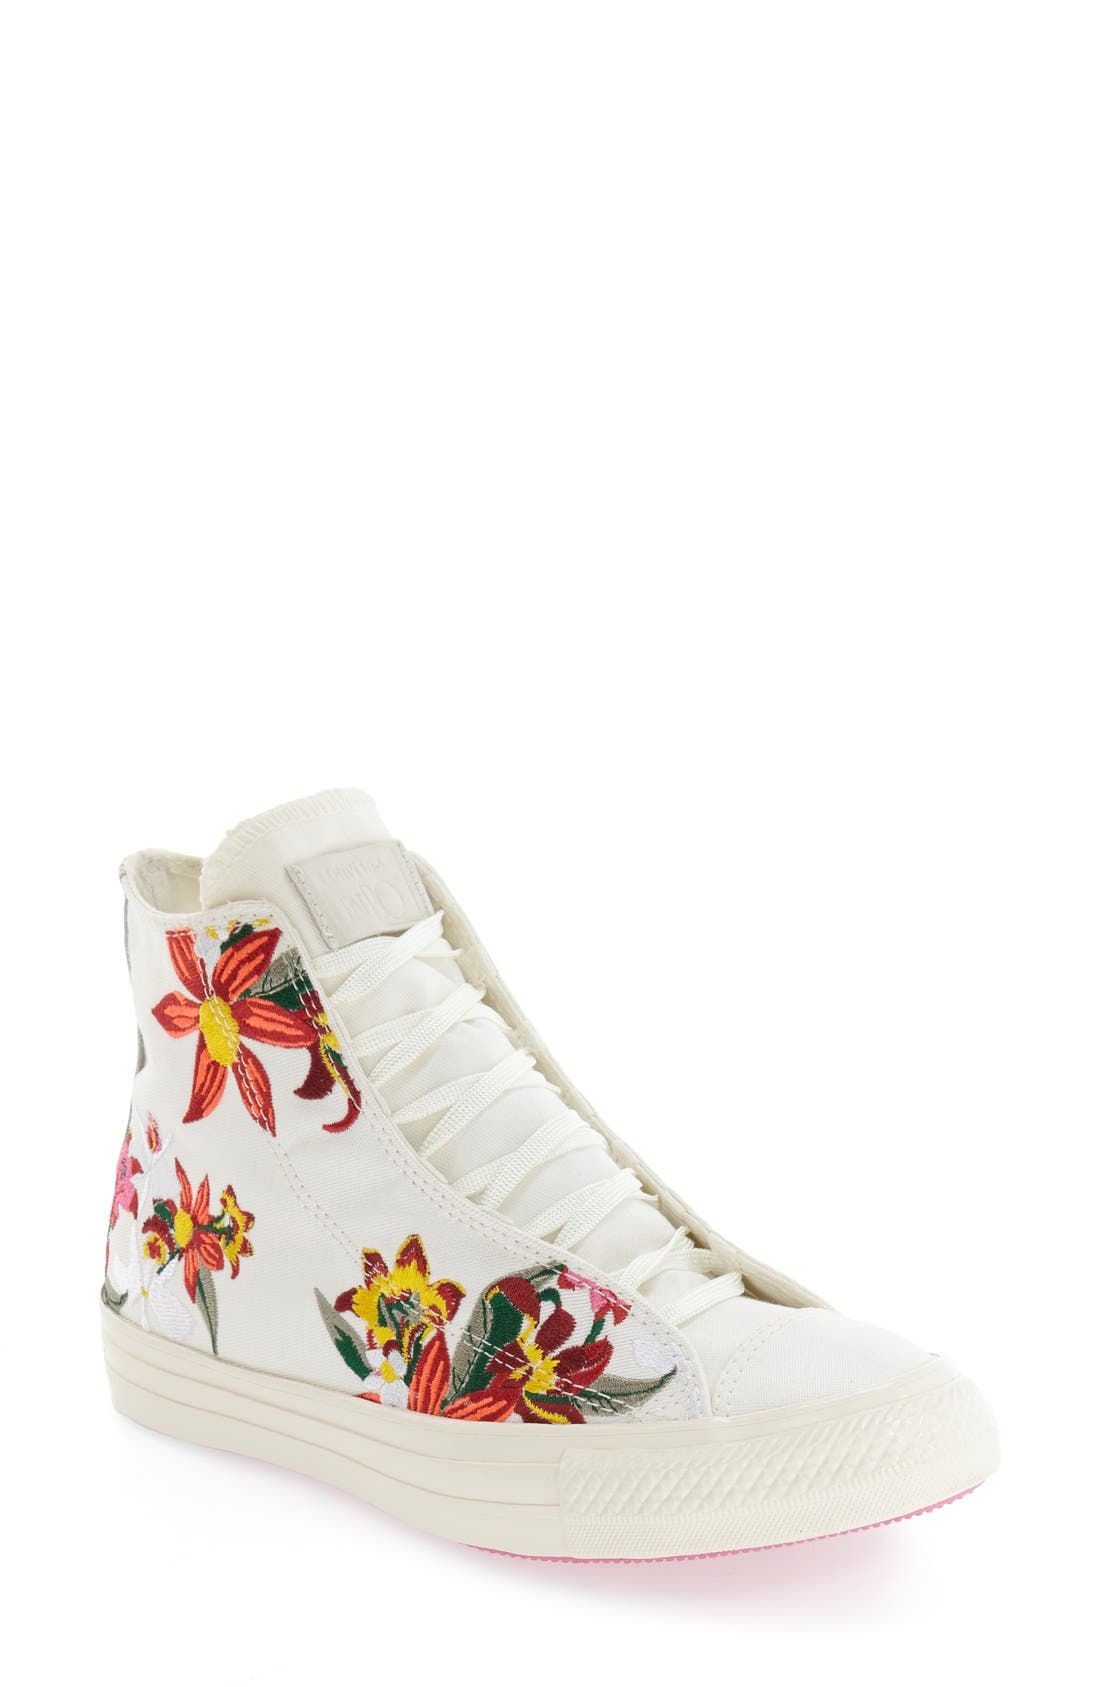 converse all star floral high top sneakers